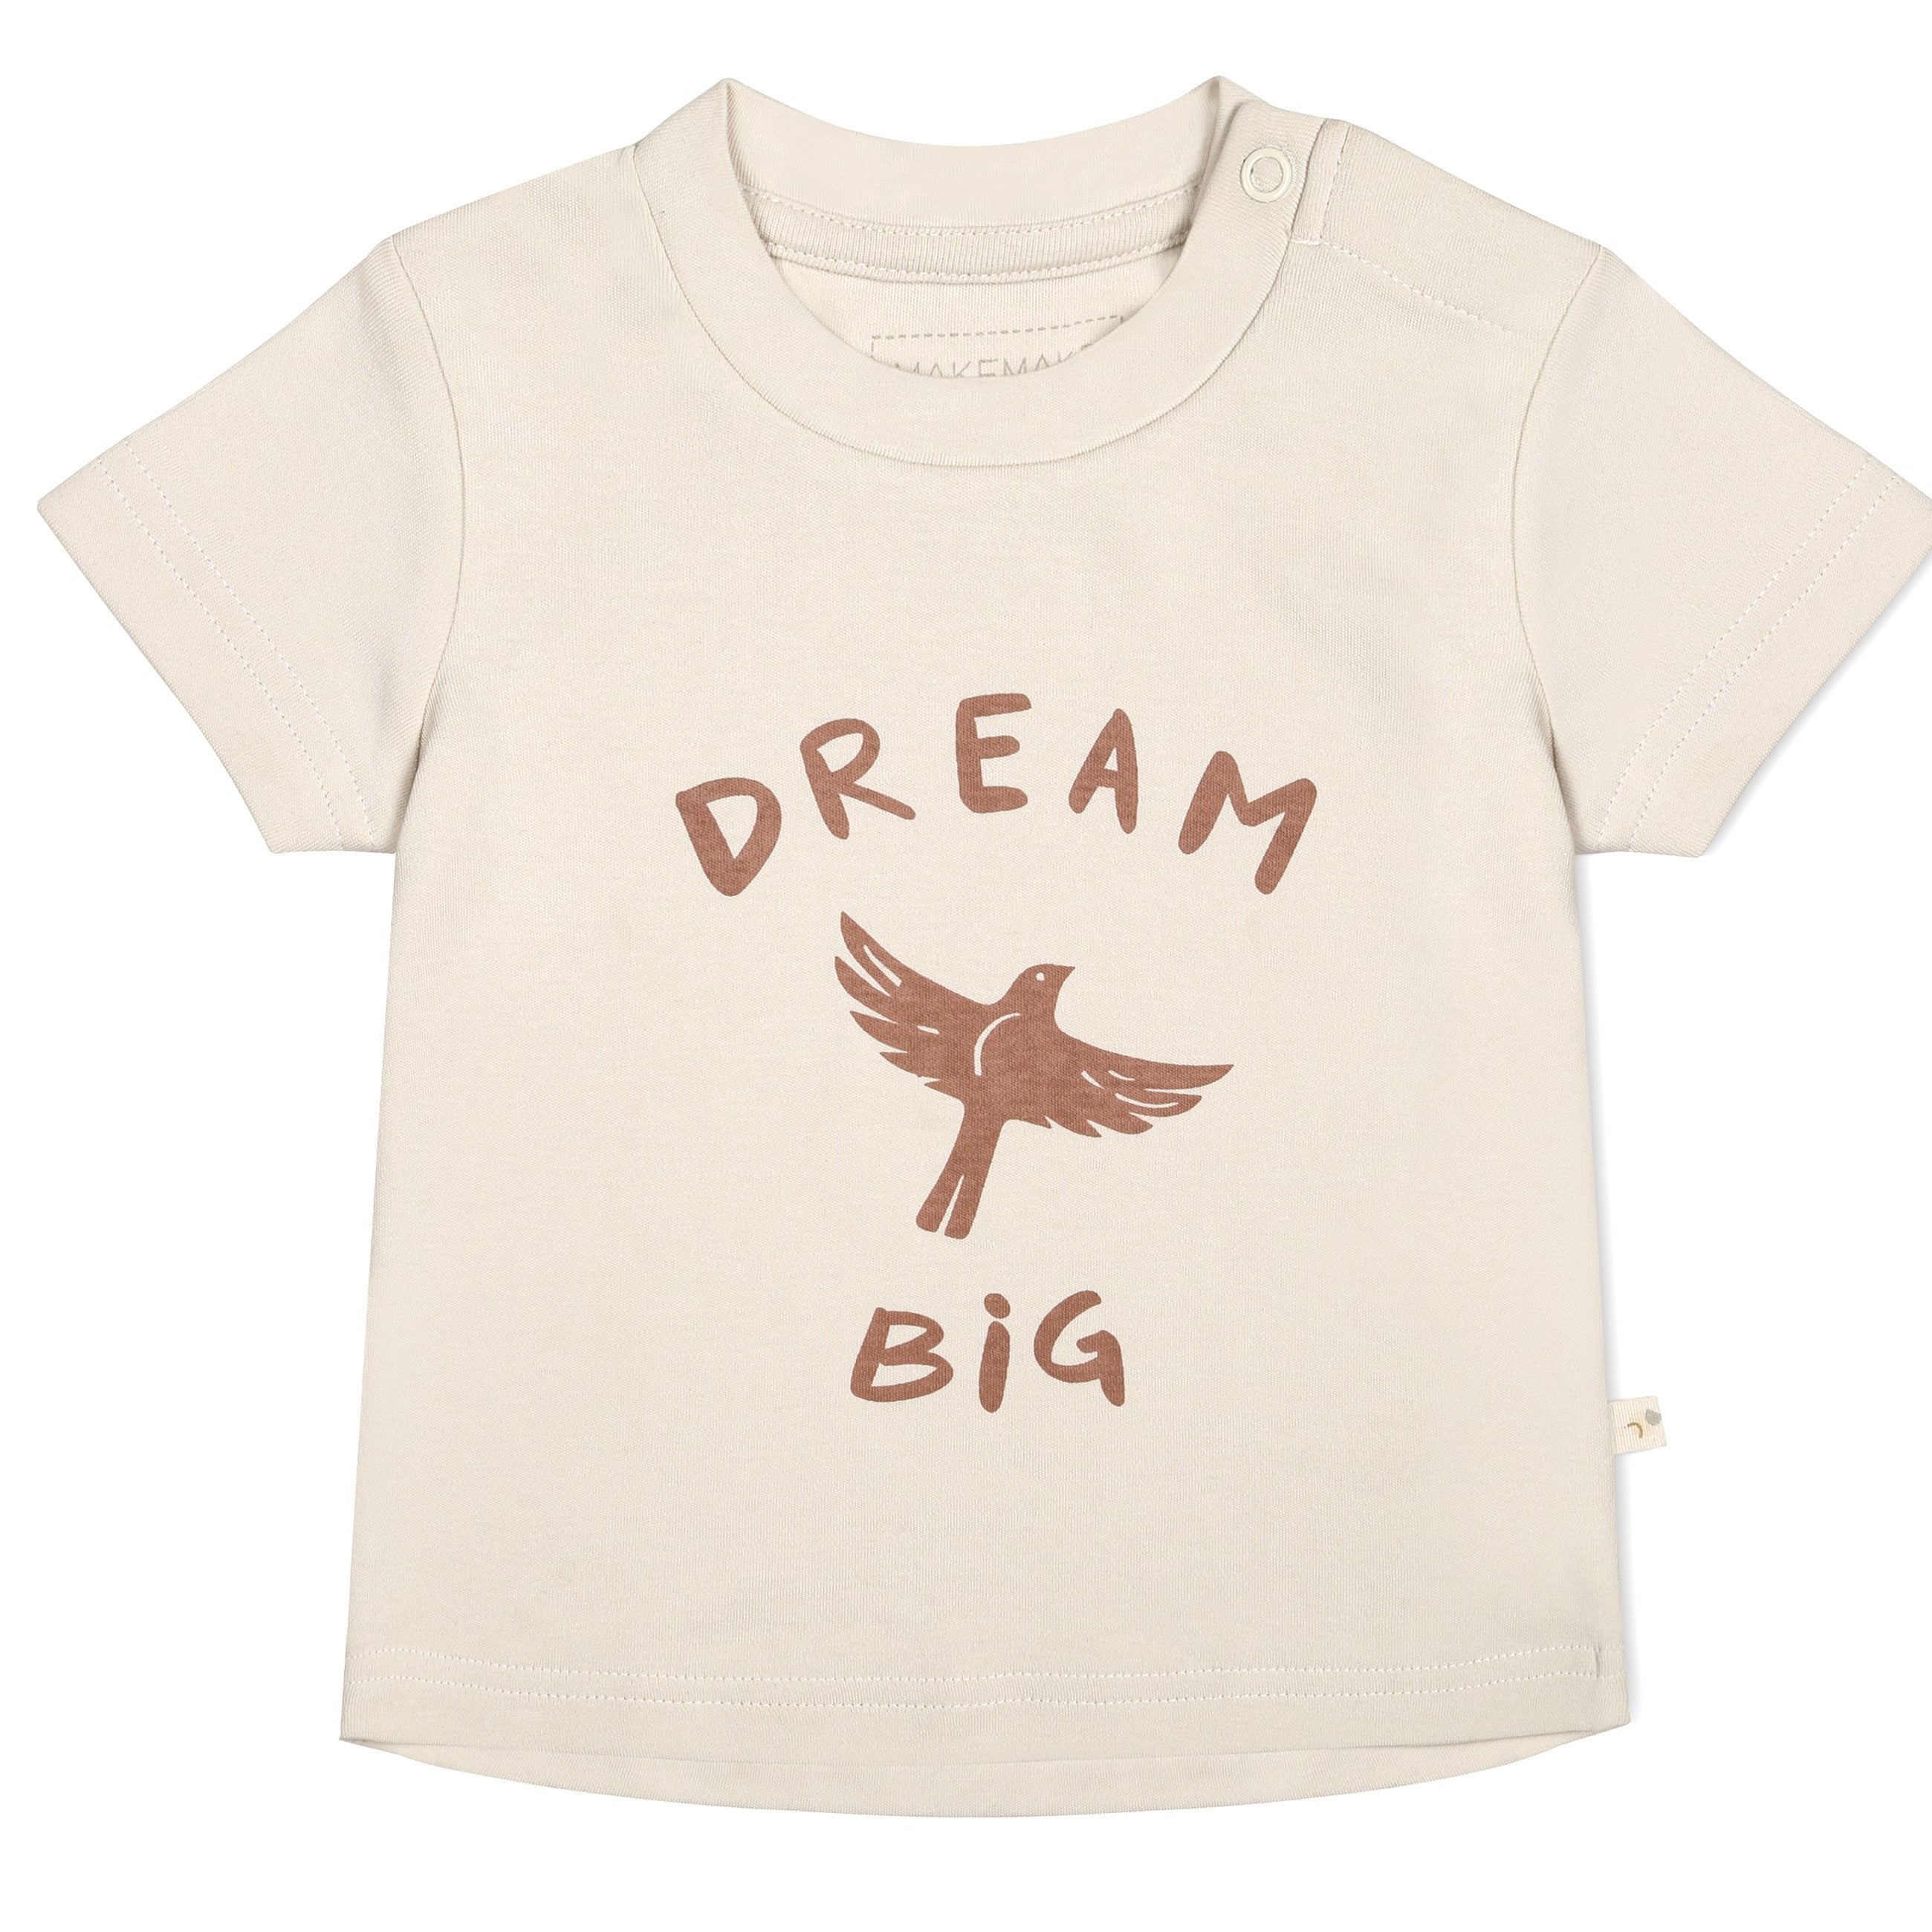 A cream-colored Makemake Organics Organic Crew Neck Tee with the phrase "dream big" in brown text, featuring an illustration of a bird in flight above the words. The shirt has a small button on the left shoulder.